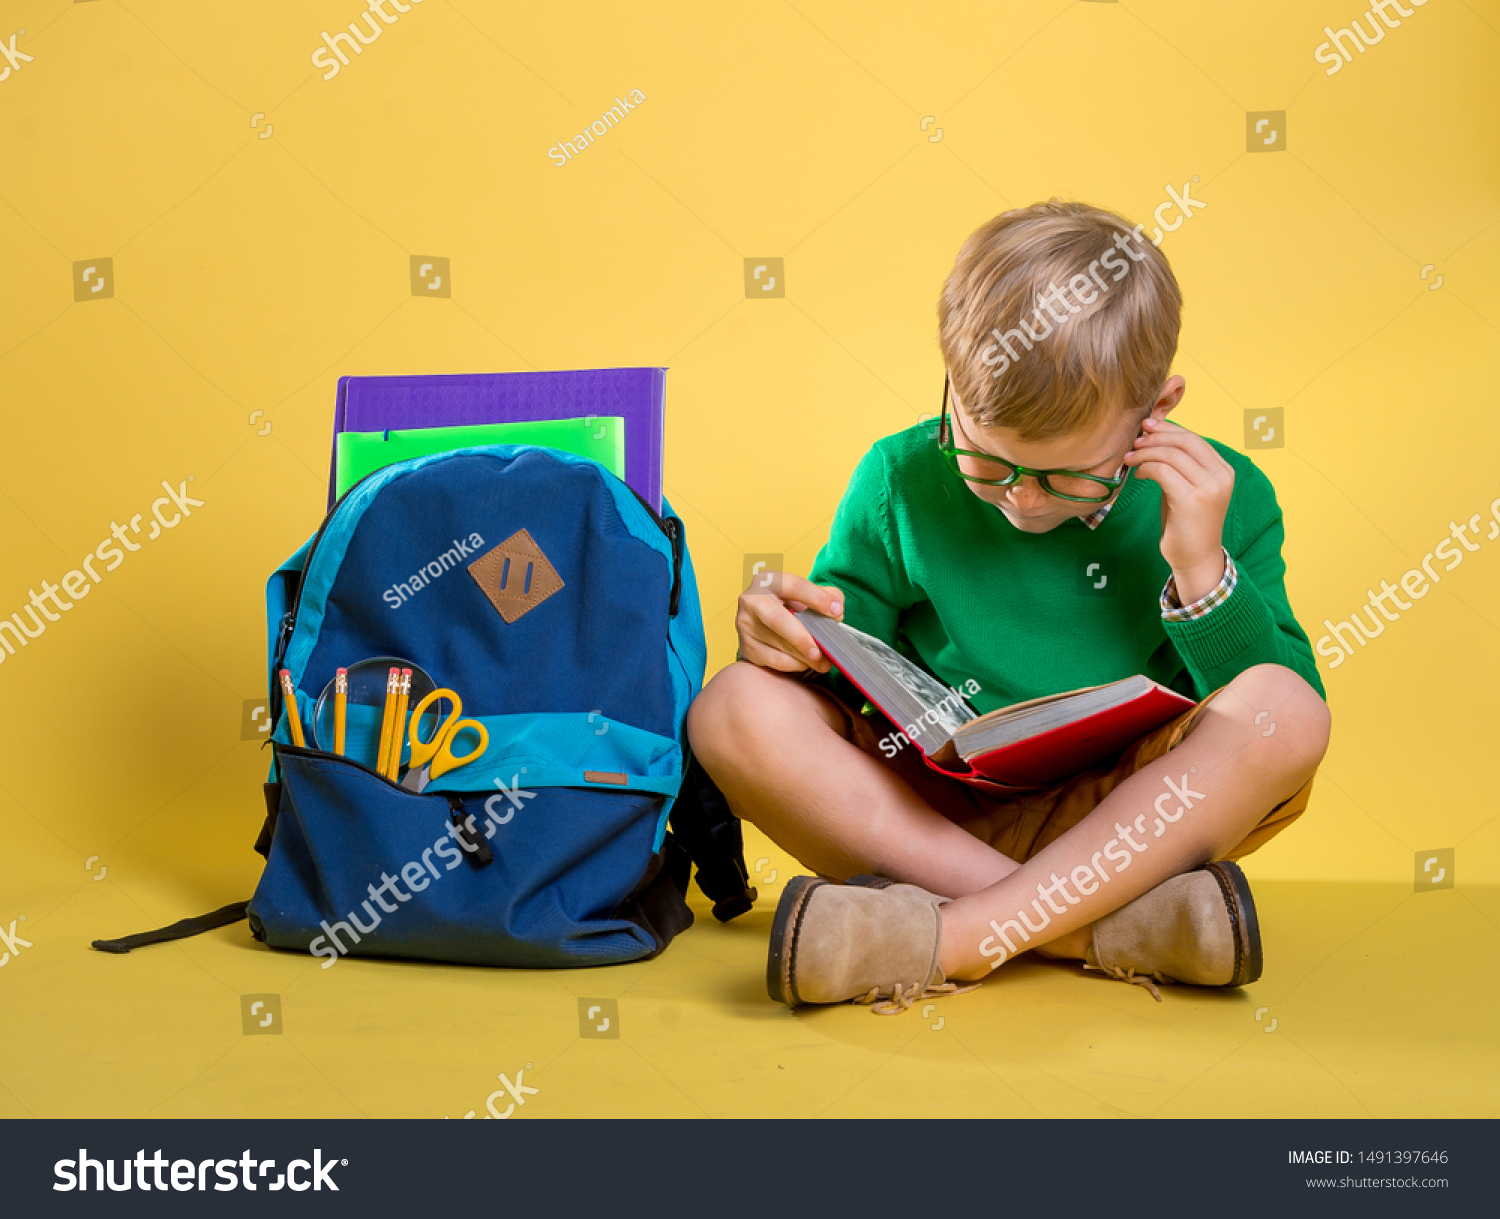 Children go back to school. Stylish boy doing homework at home with backpack full of books, pencils. Pupil reading a book, writing and painting. Kid is drawing. Child in glasses on yellow wall. #1491397646